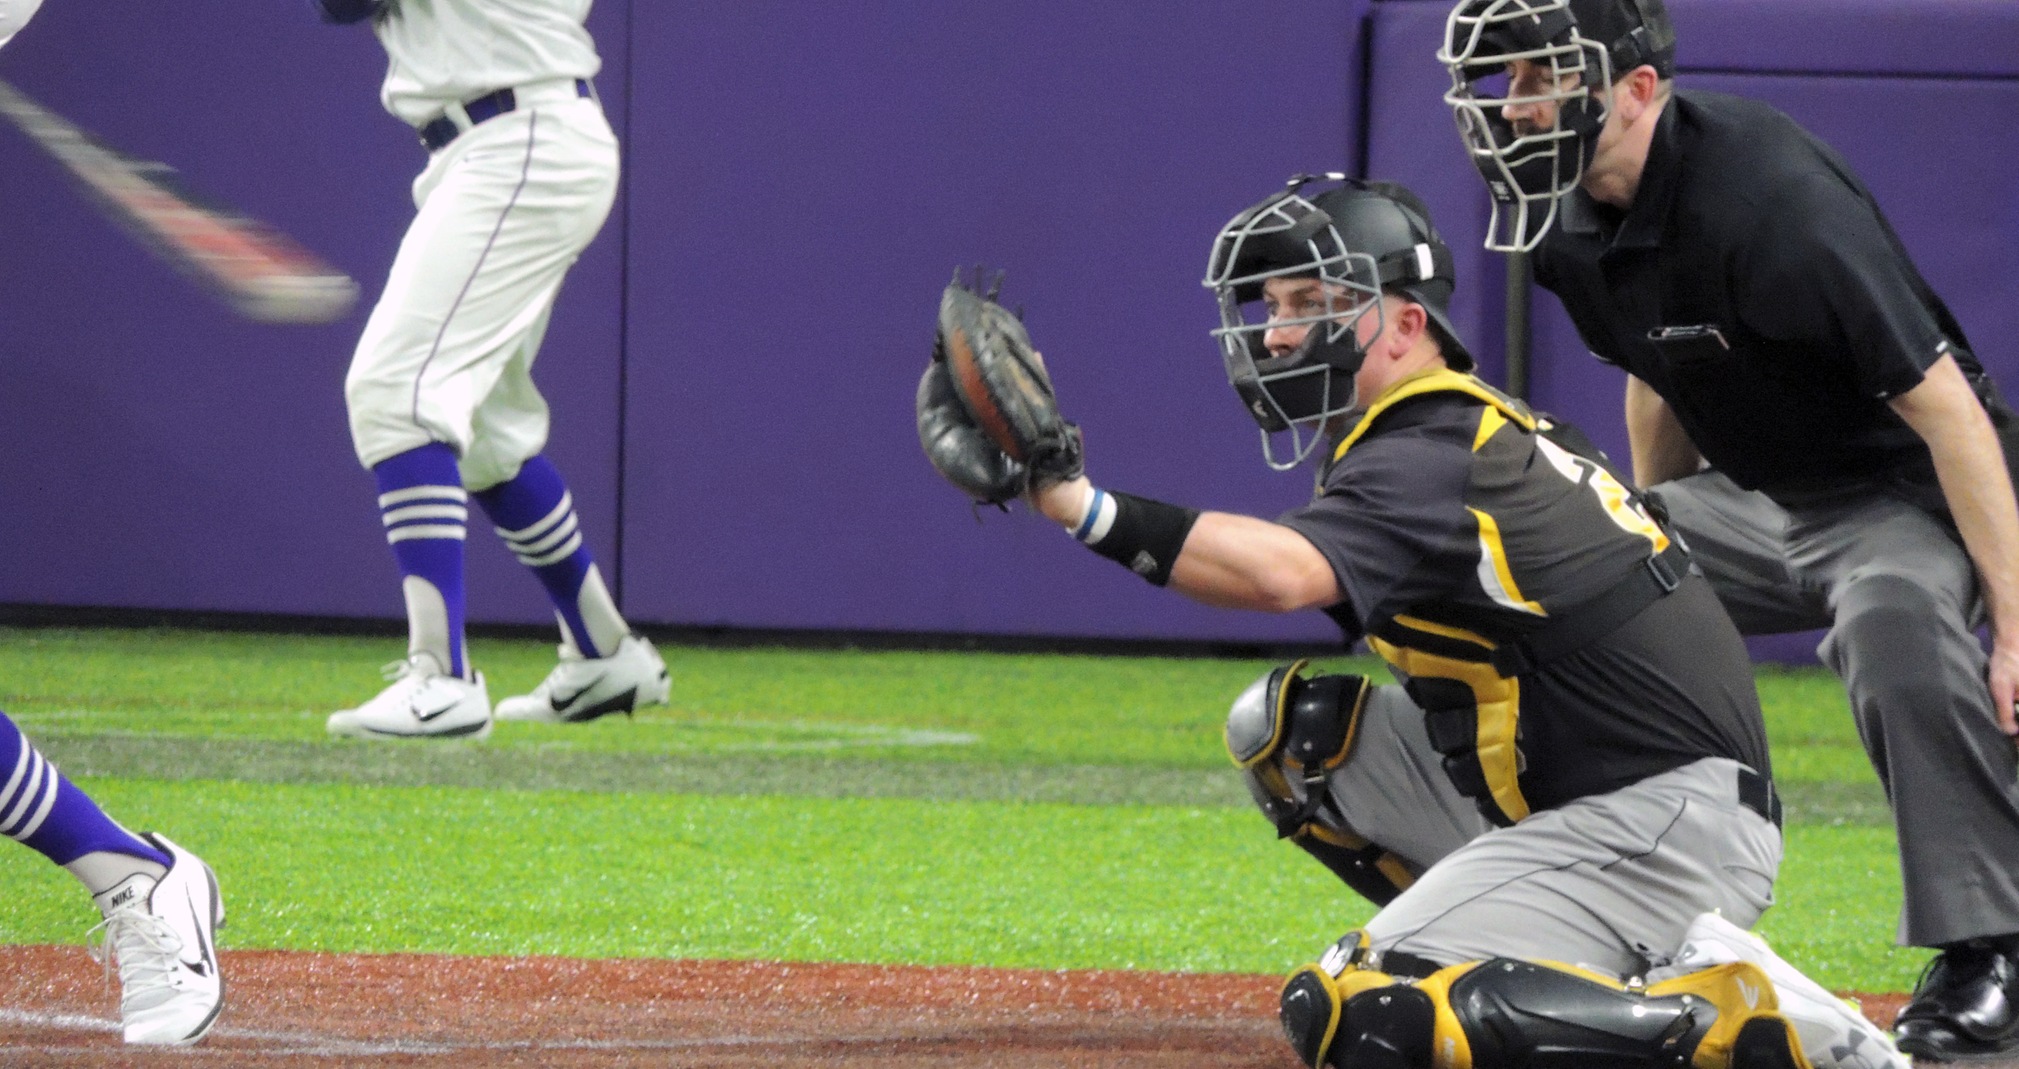 Taylor Grimm homered twice as the Titans swept the Tommies.